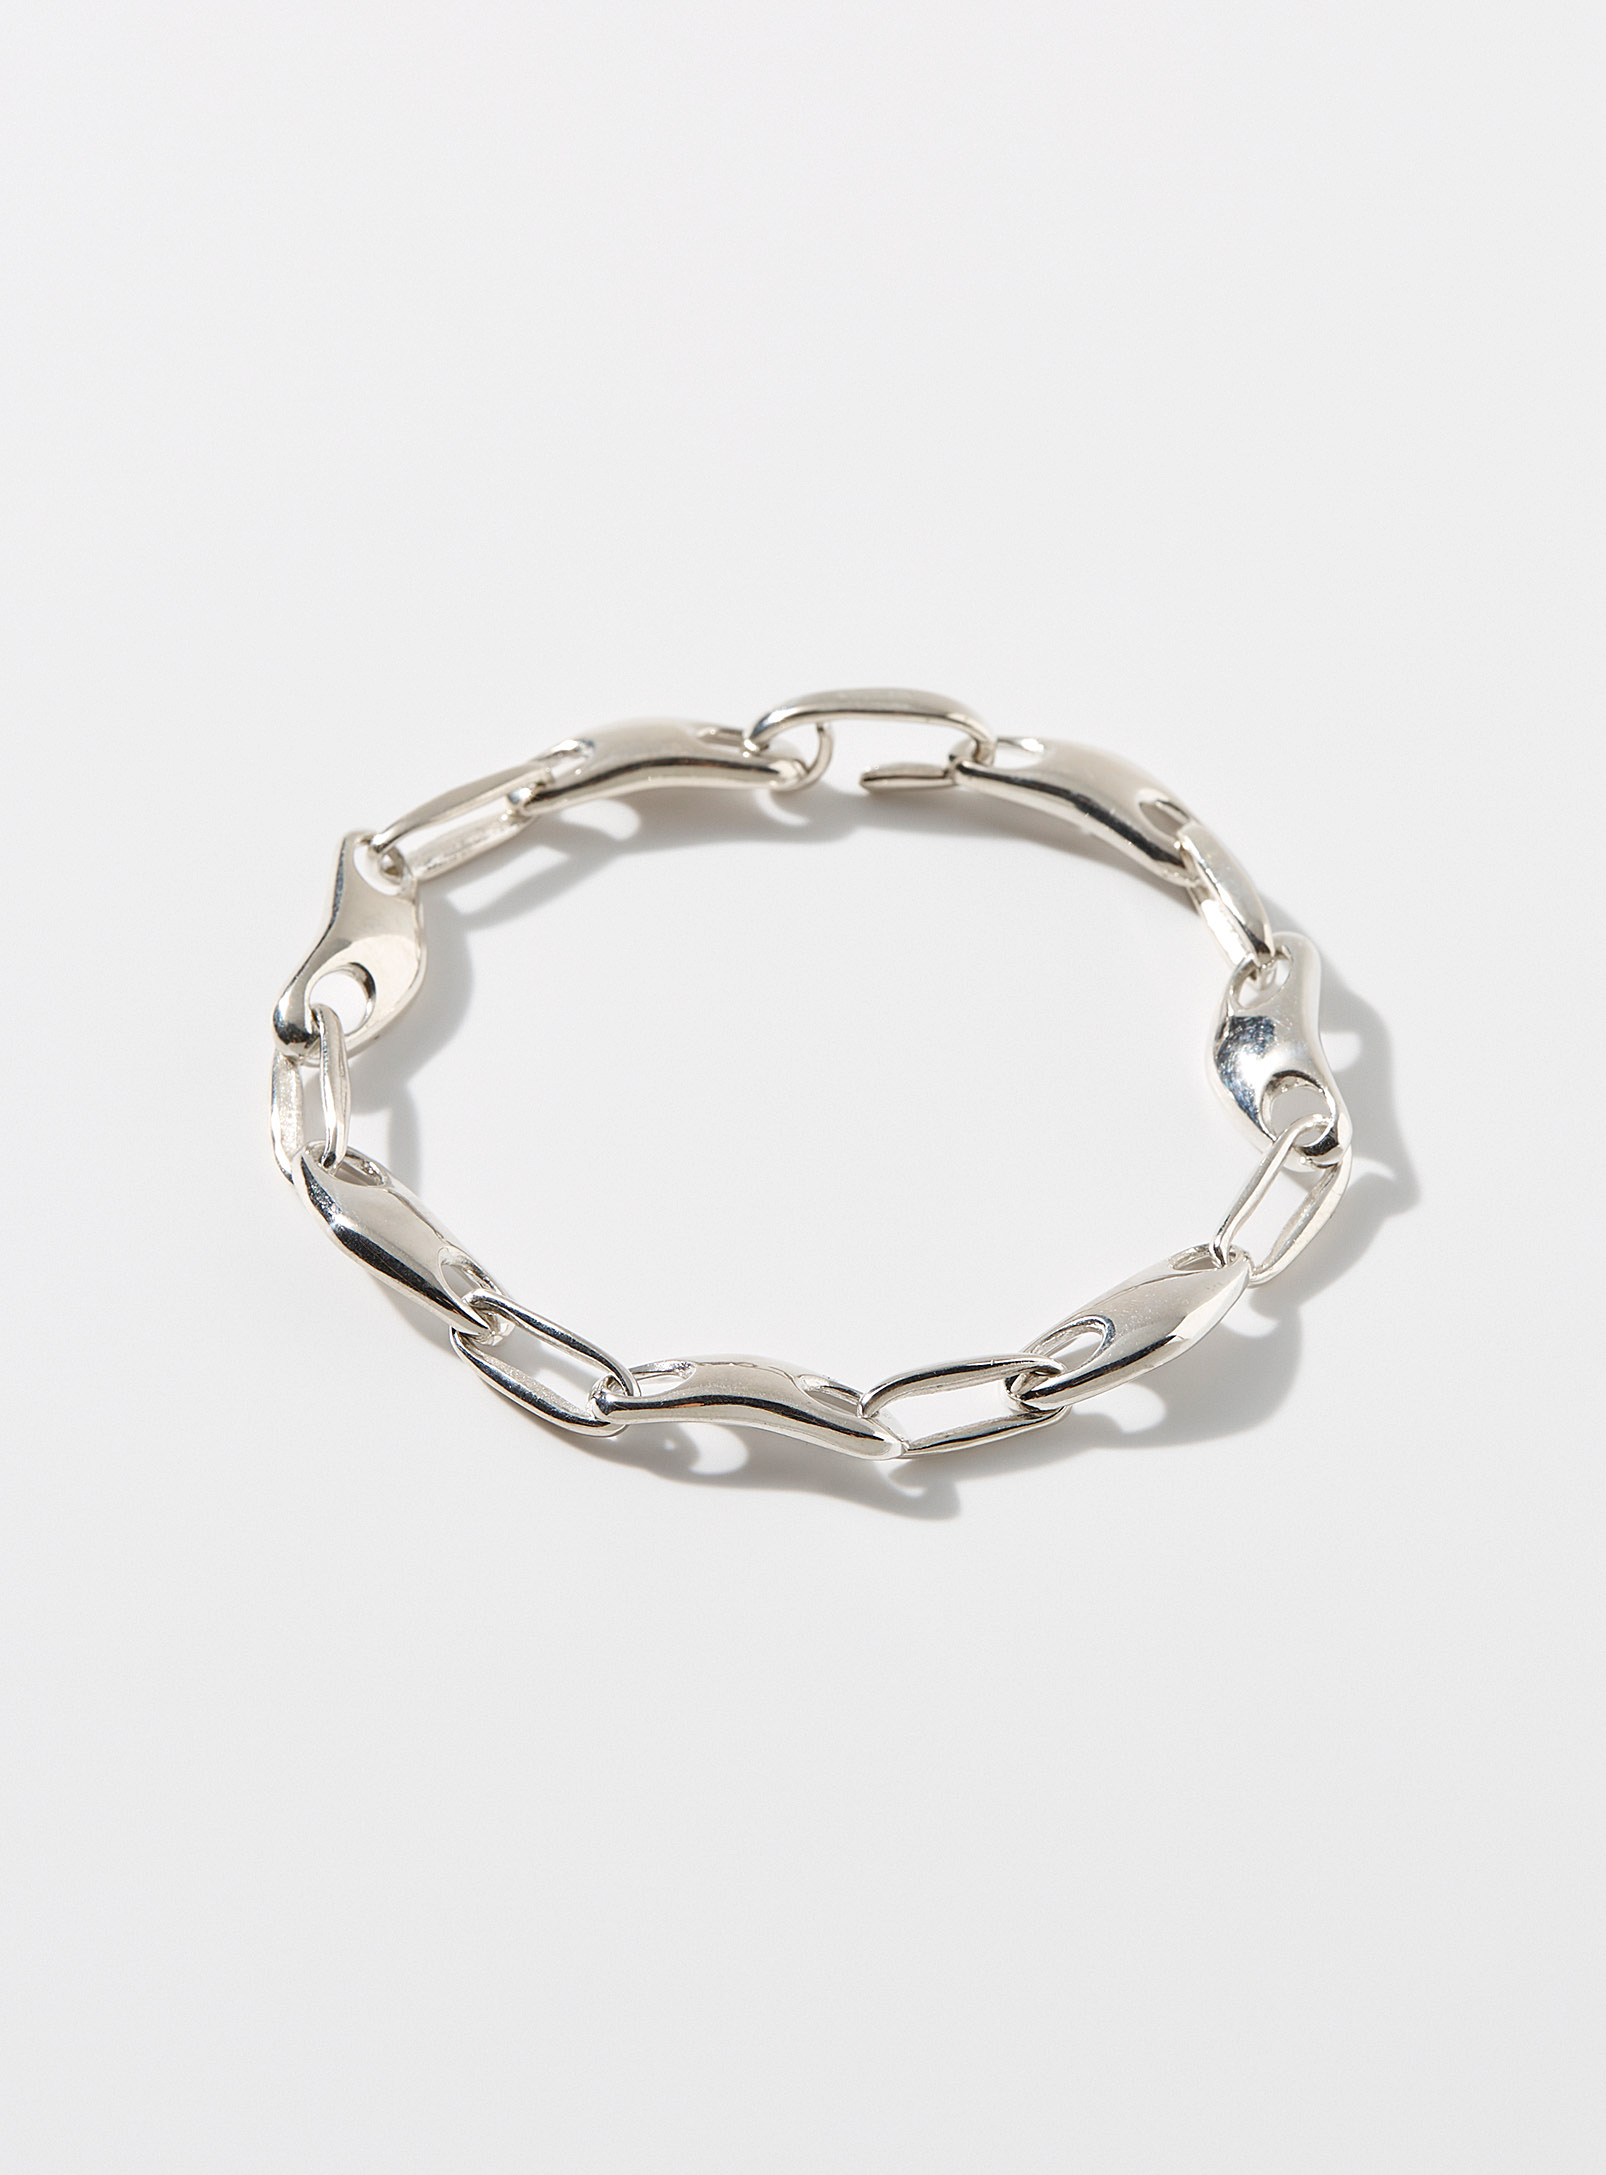 Wolf Circus - Men's River recycled sterling silver bracelet